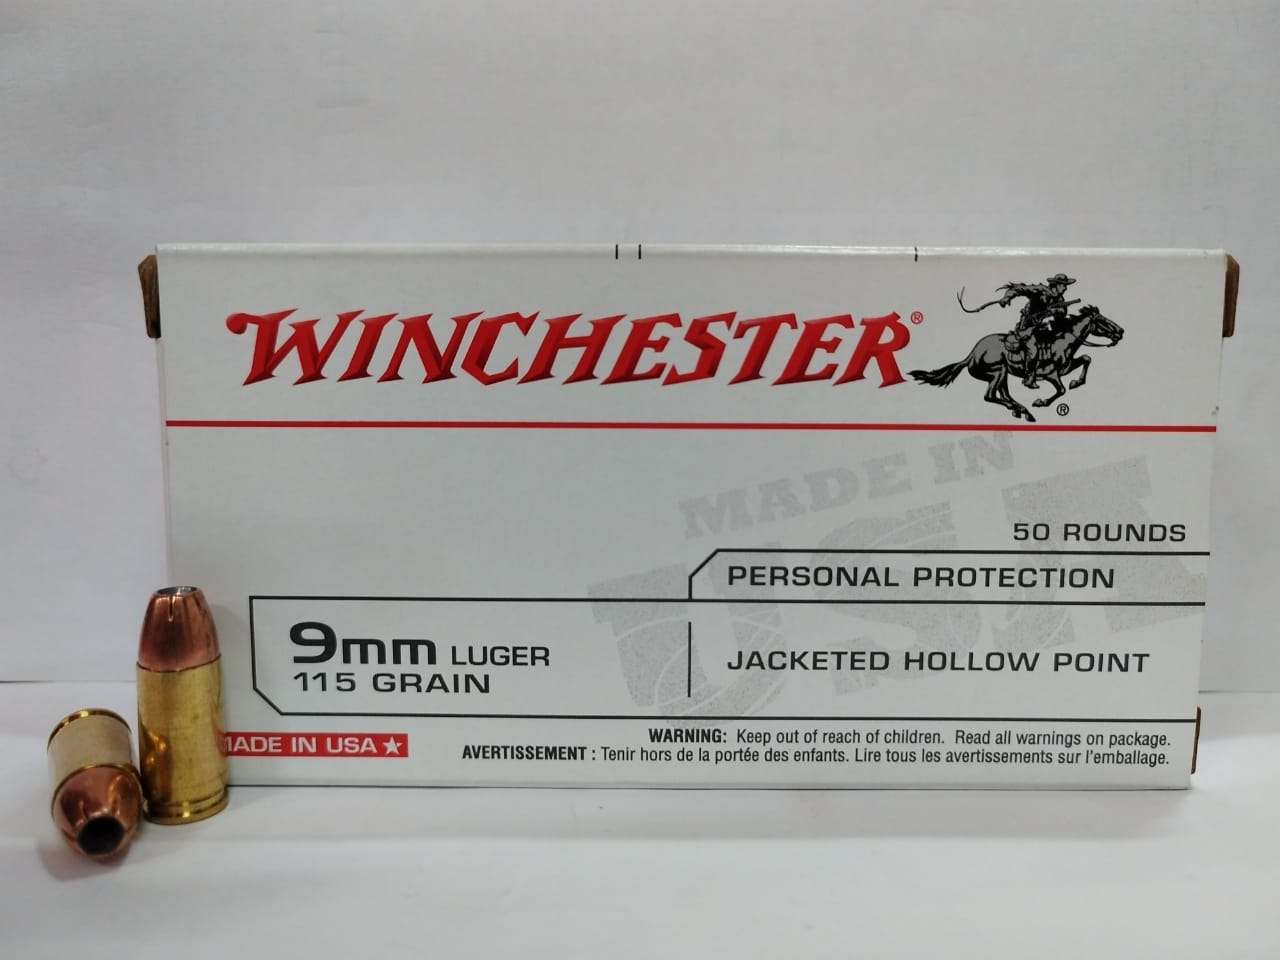 WINCHESTER- 9mm LUGER  (115 grain) - JACKETED HOLLOW POINT